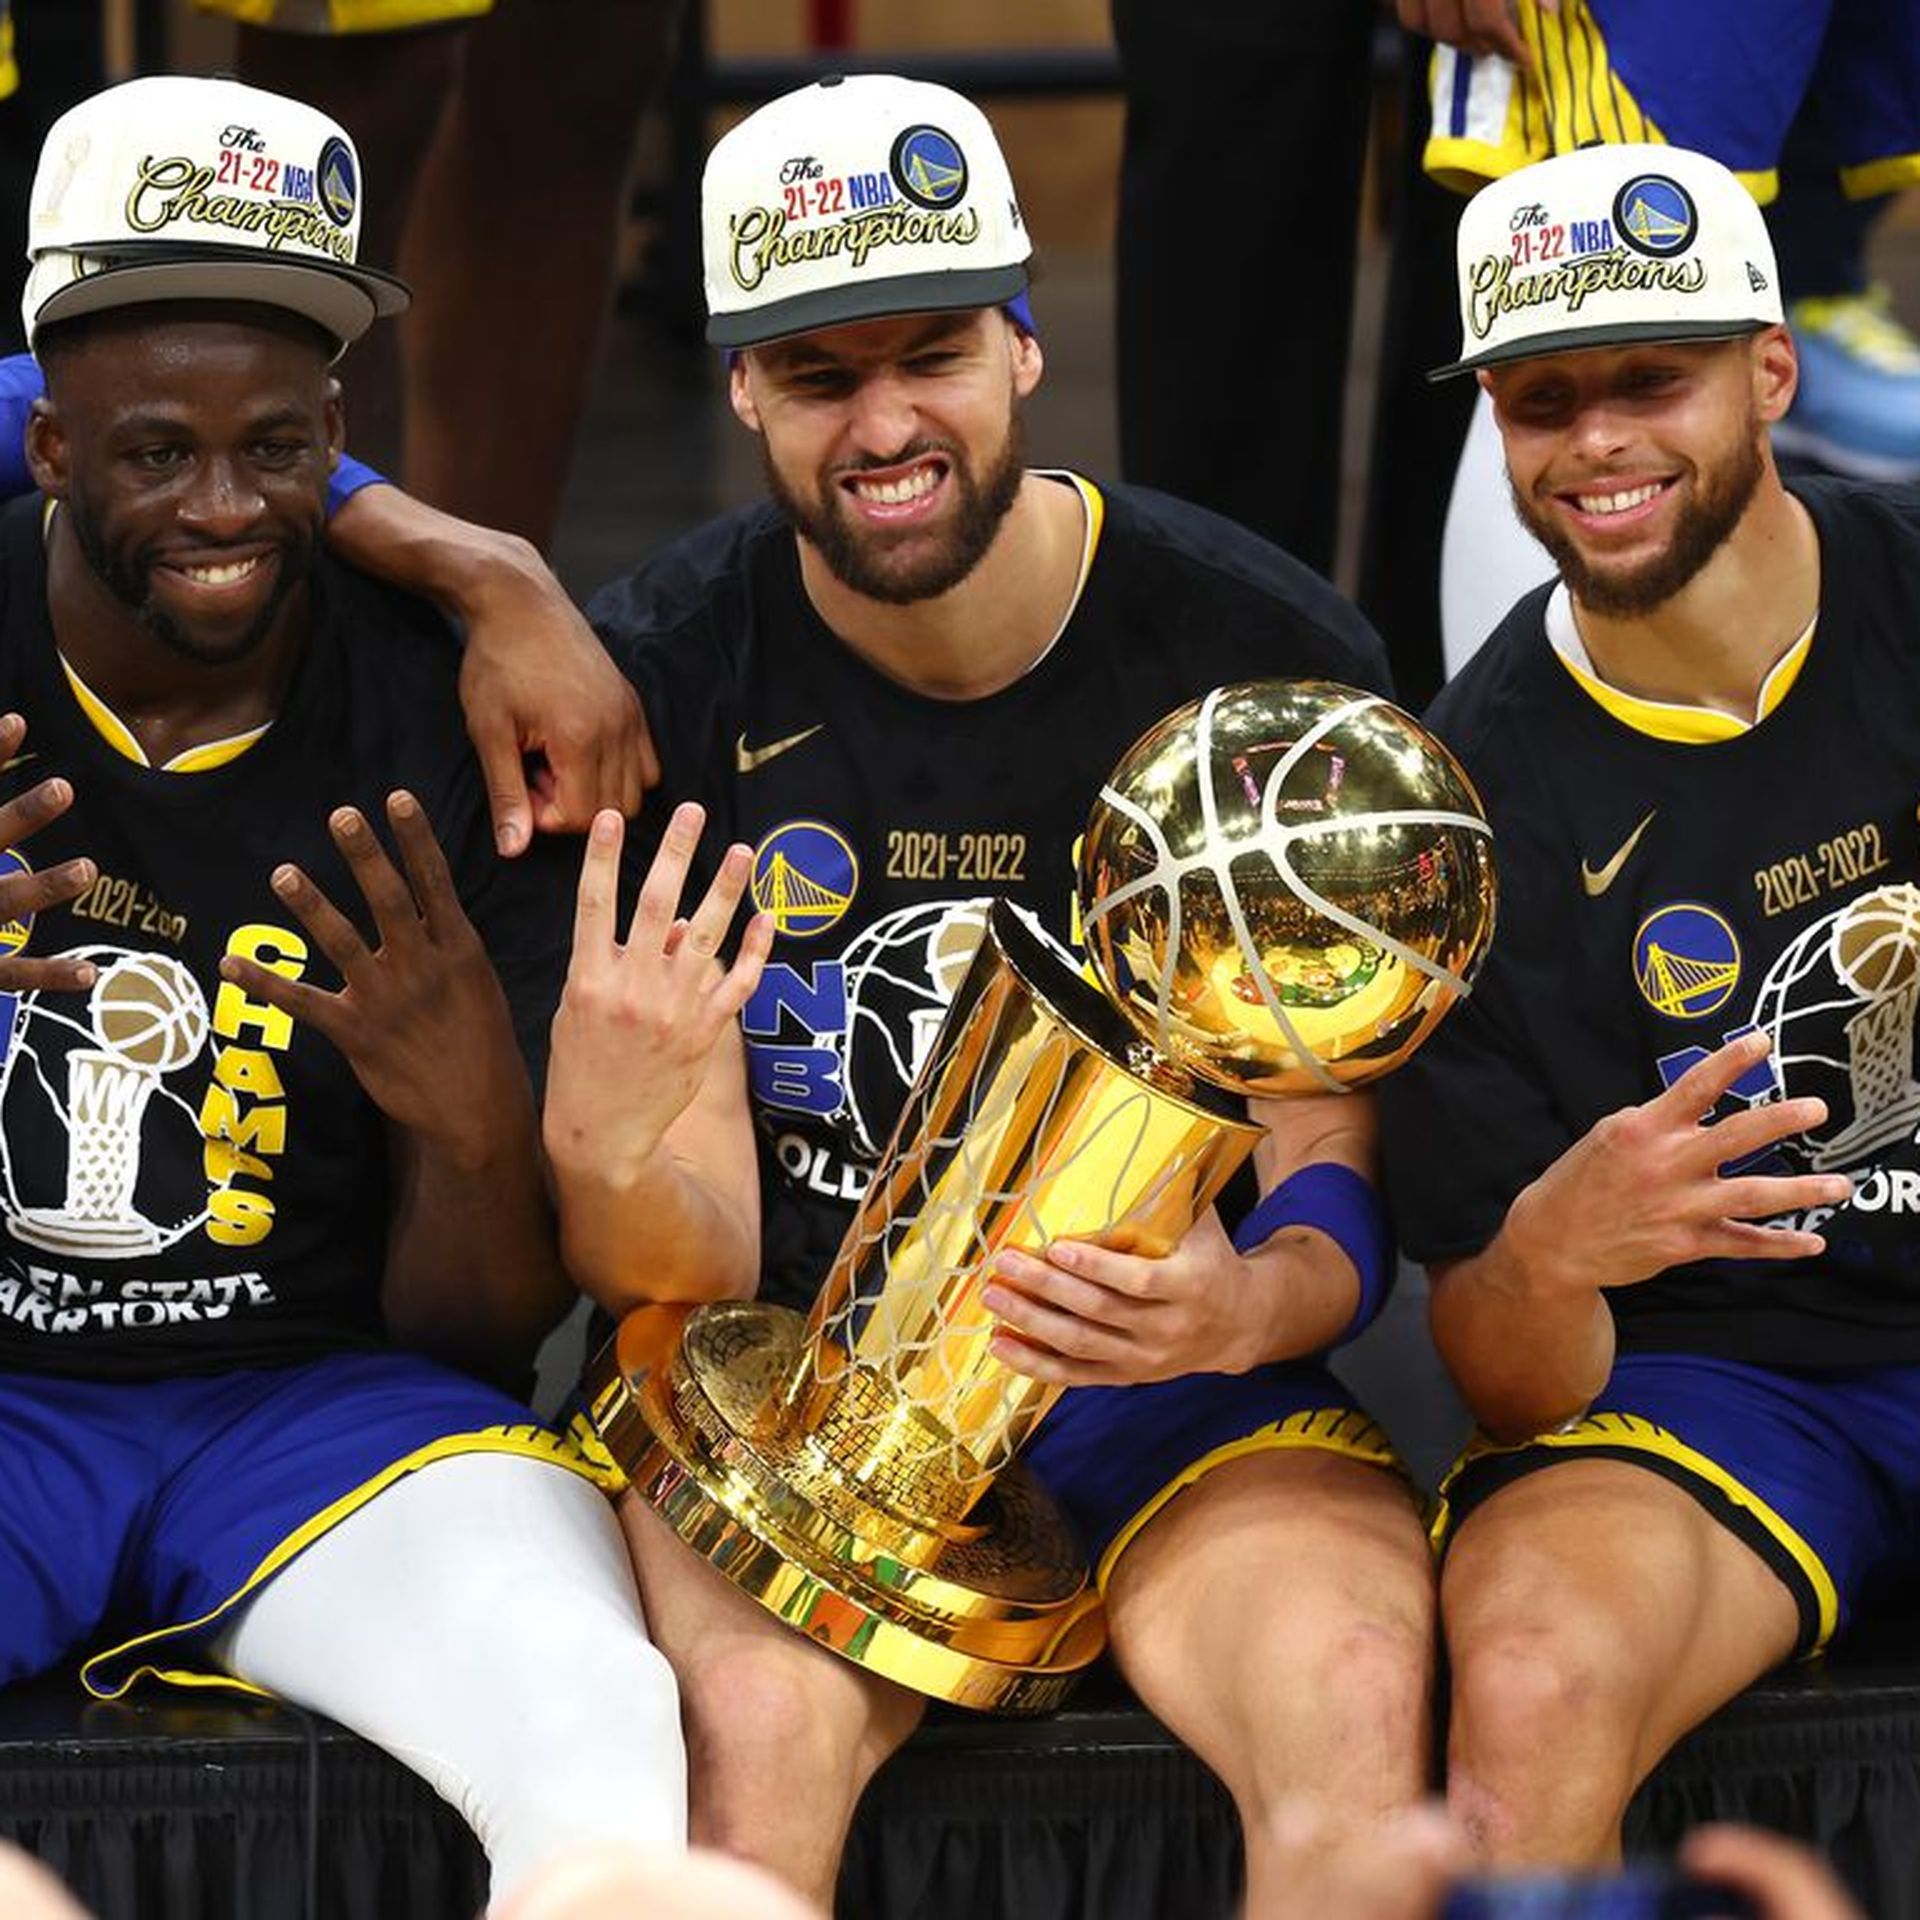 From left to right: Andre Iguodala, Draymond Green, Klay Thompson, and Stephen Curry